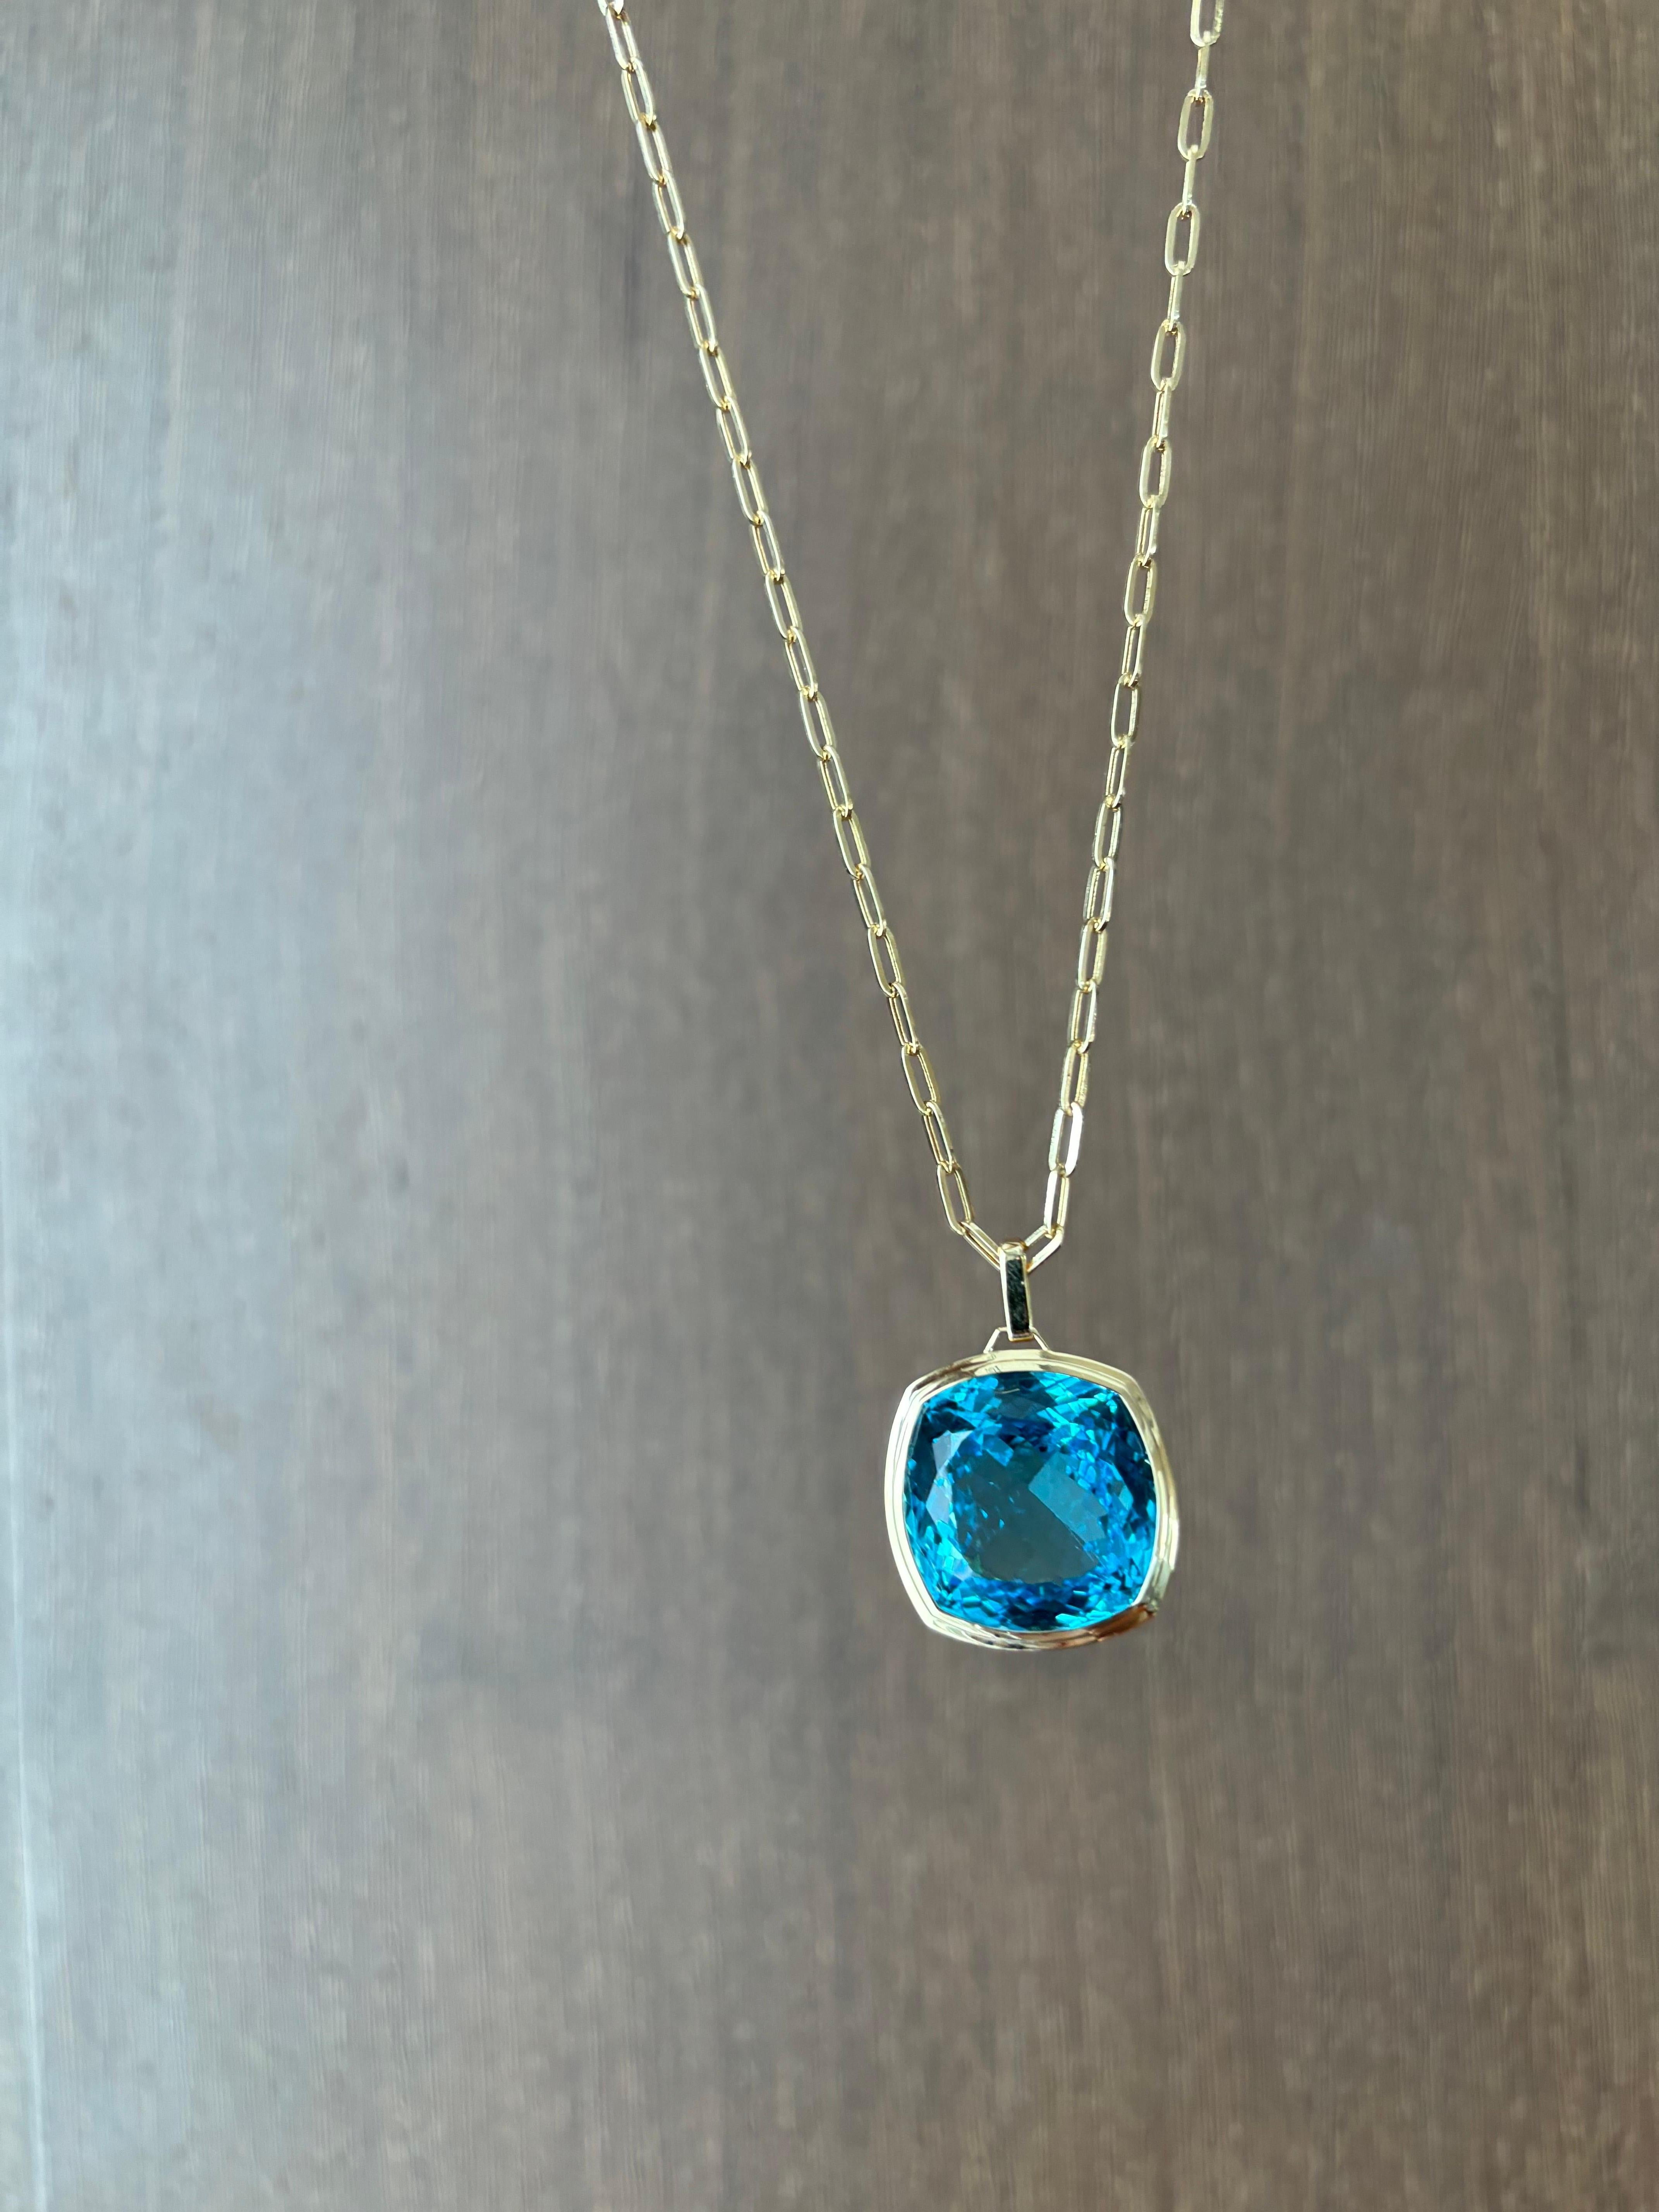 Women's or Men's 82.46 Carat Blue Topaz Pendant Necklace with Link Chain For Sale